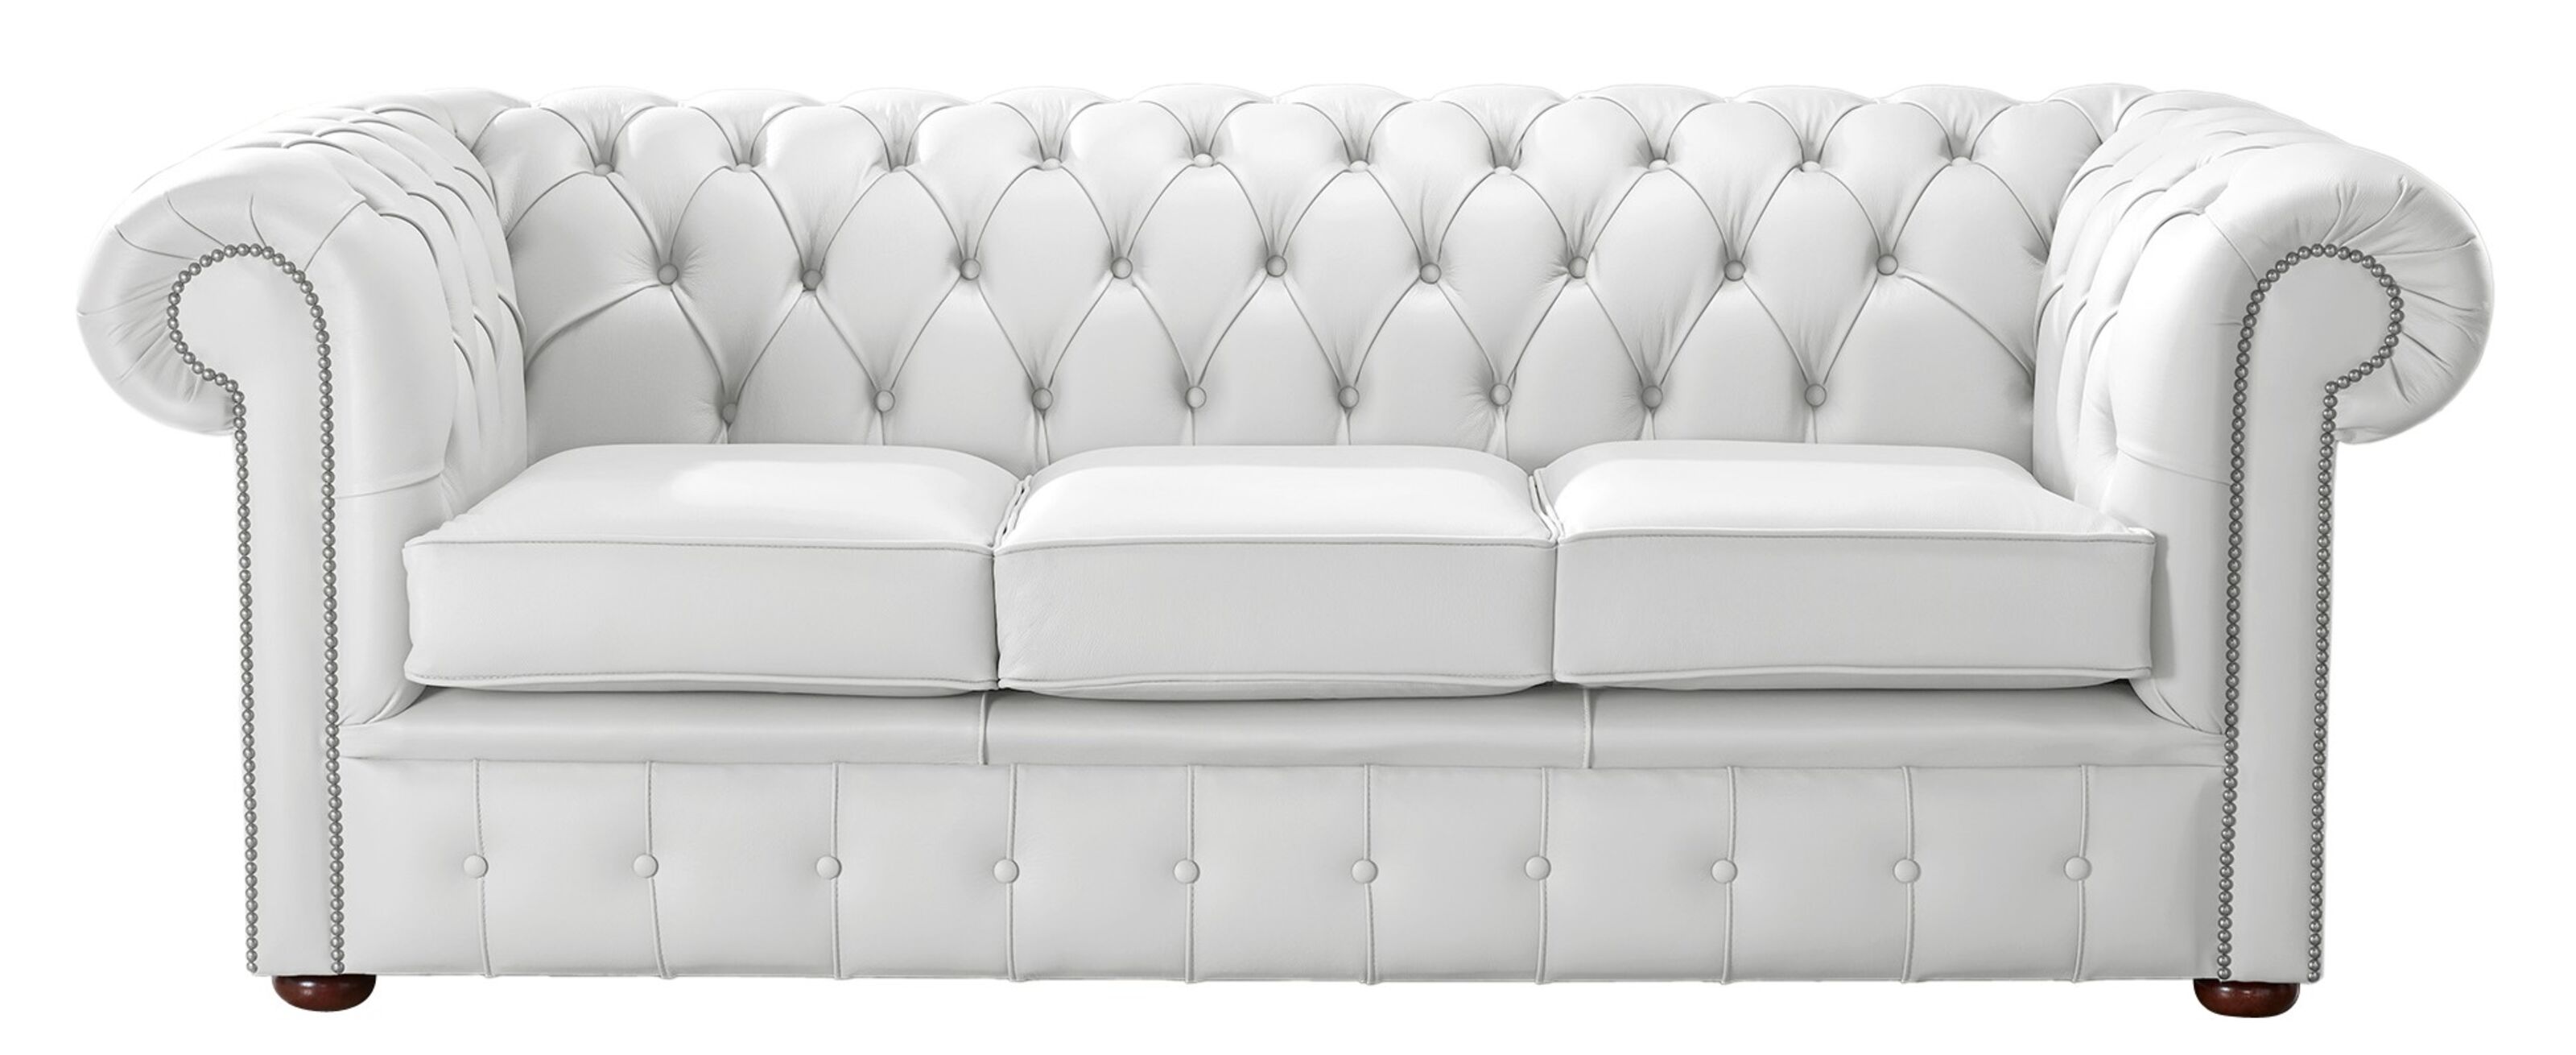 Stylish Sophistication Chesterfield Sofas in Blackburn  %Post Title